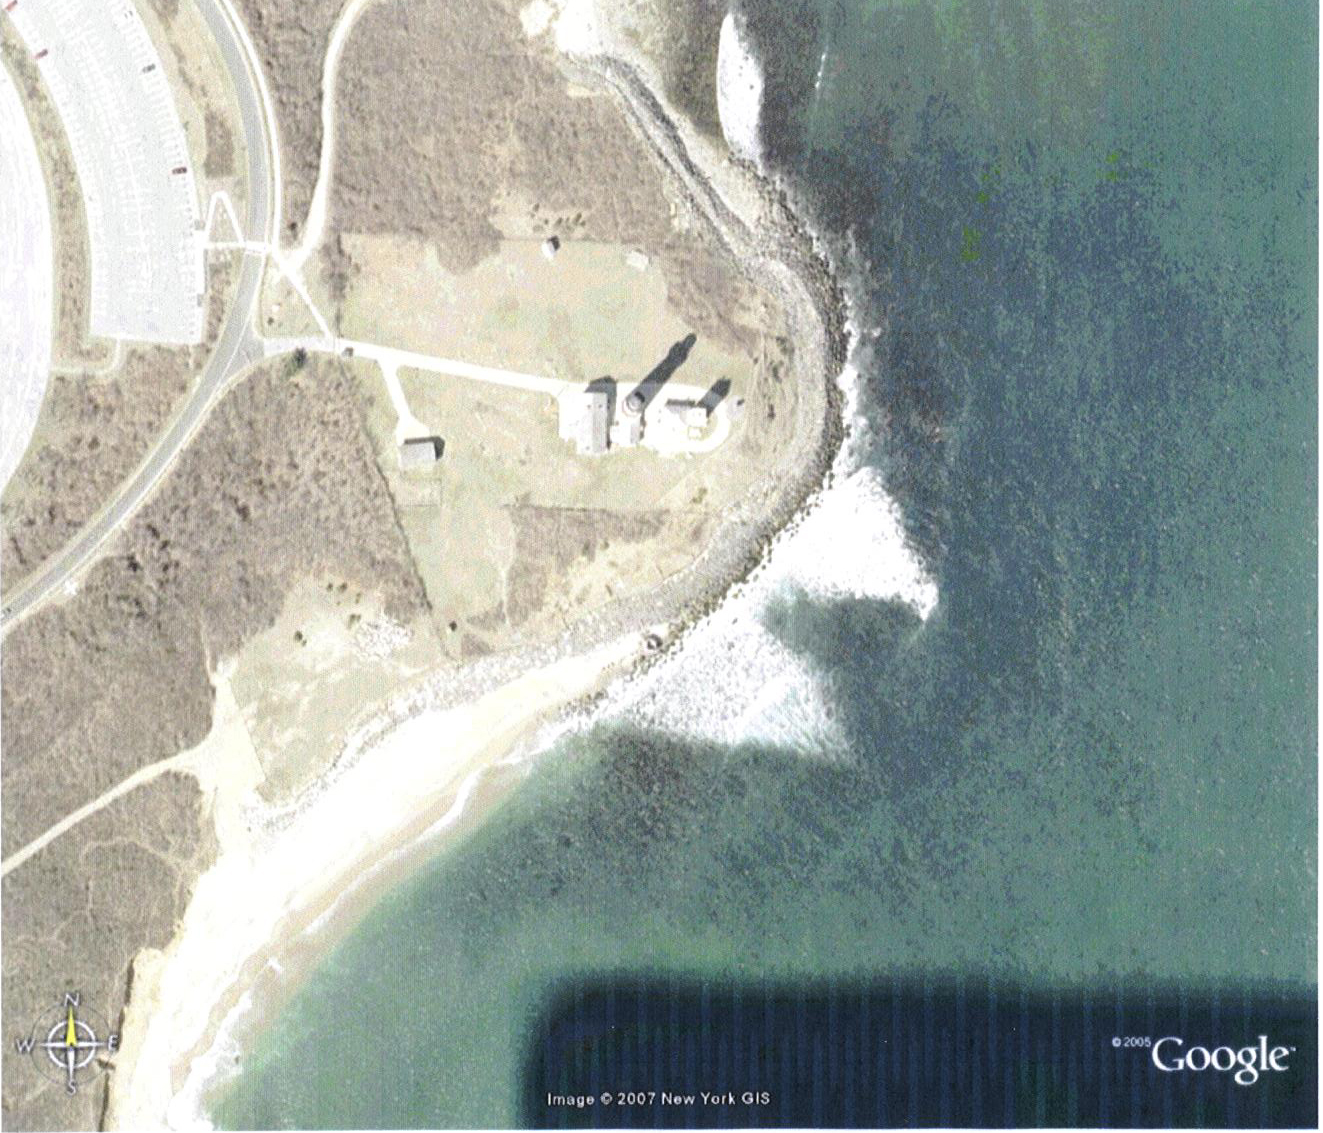 Montauk Point as seen from space